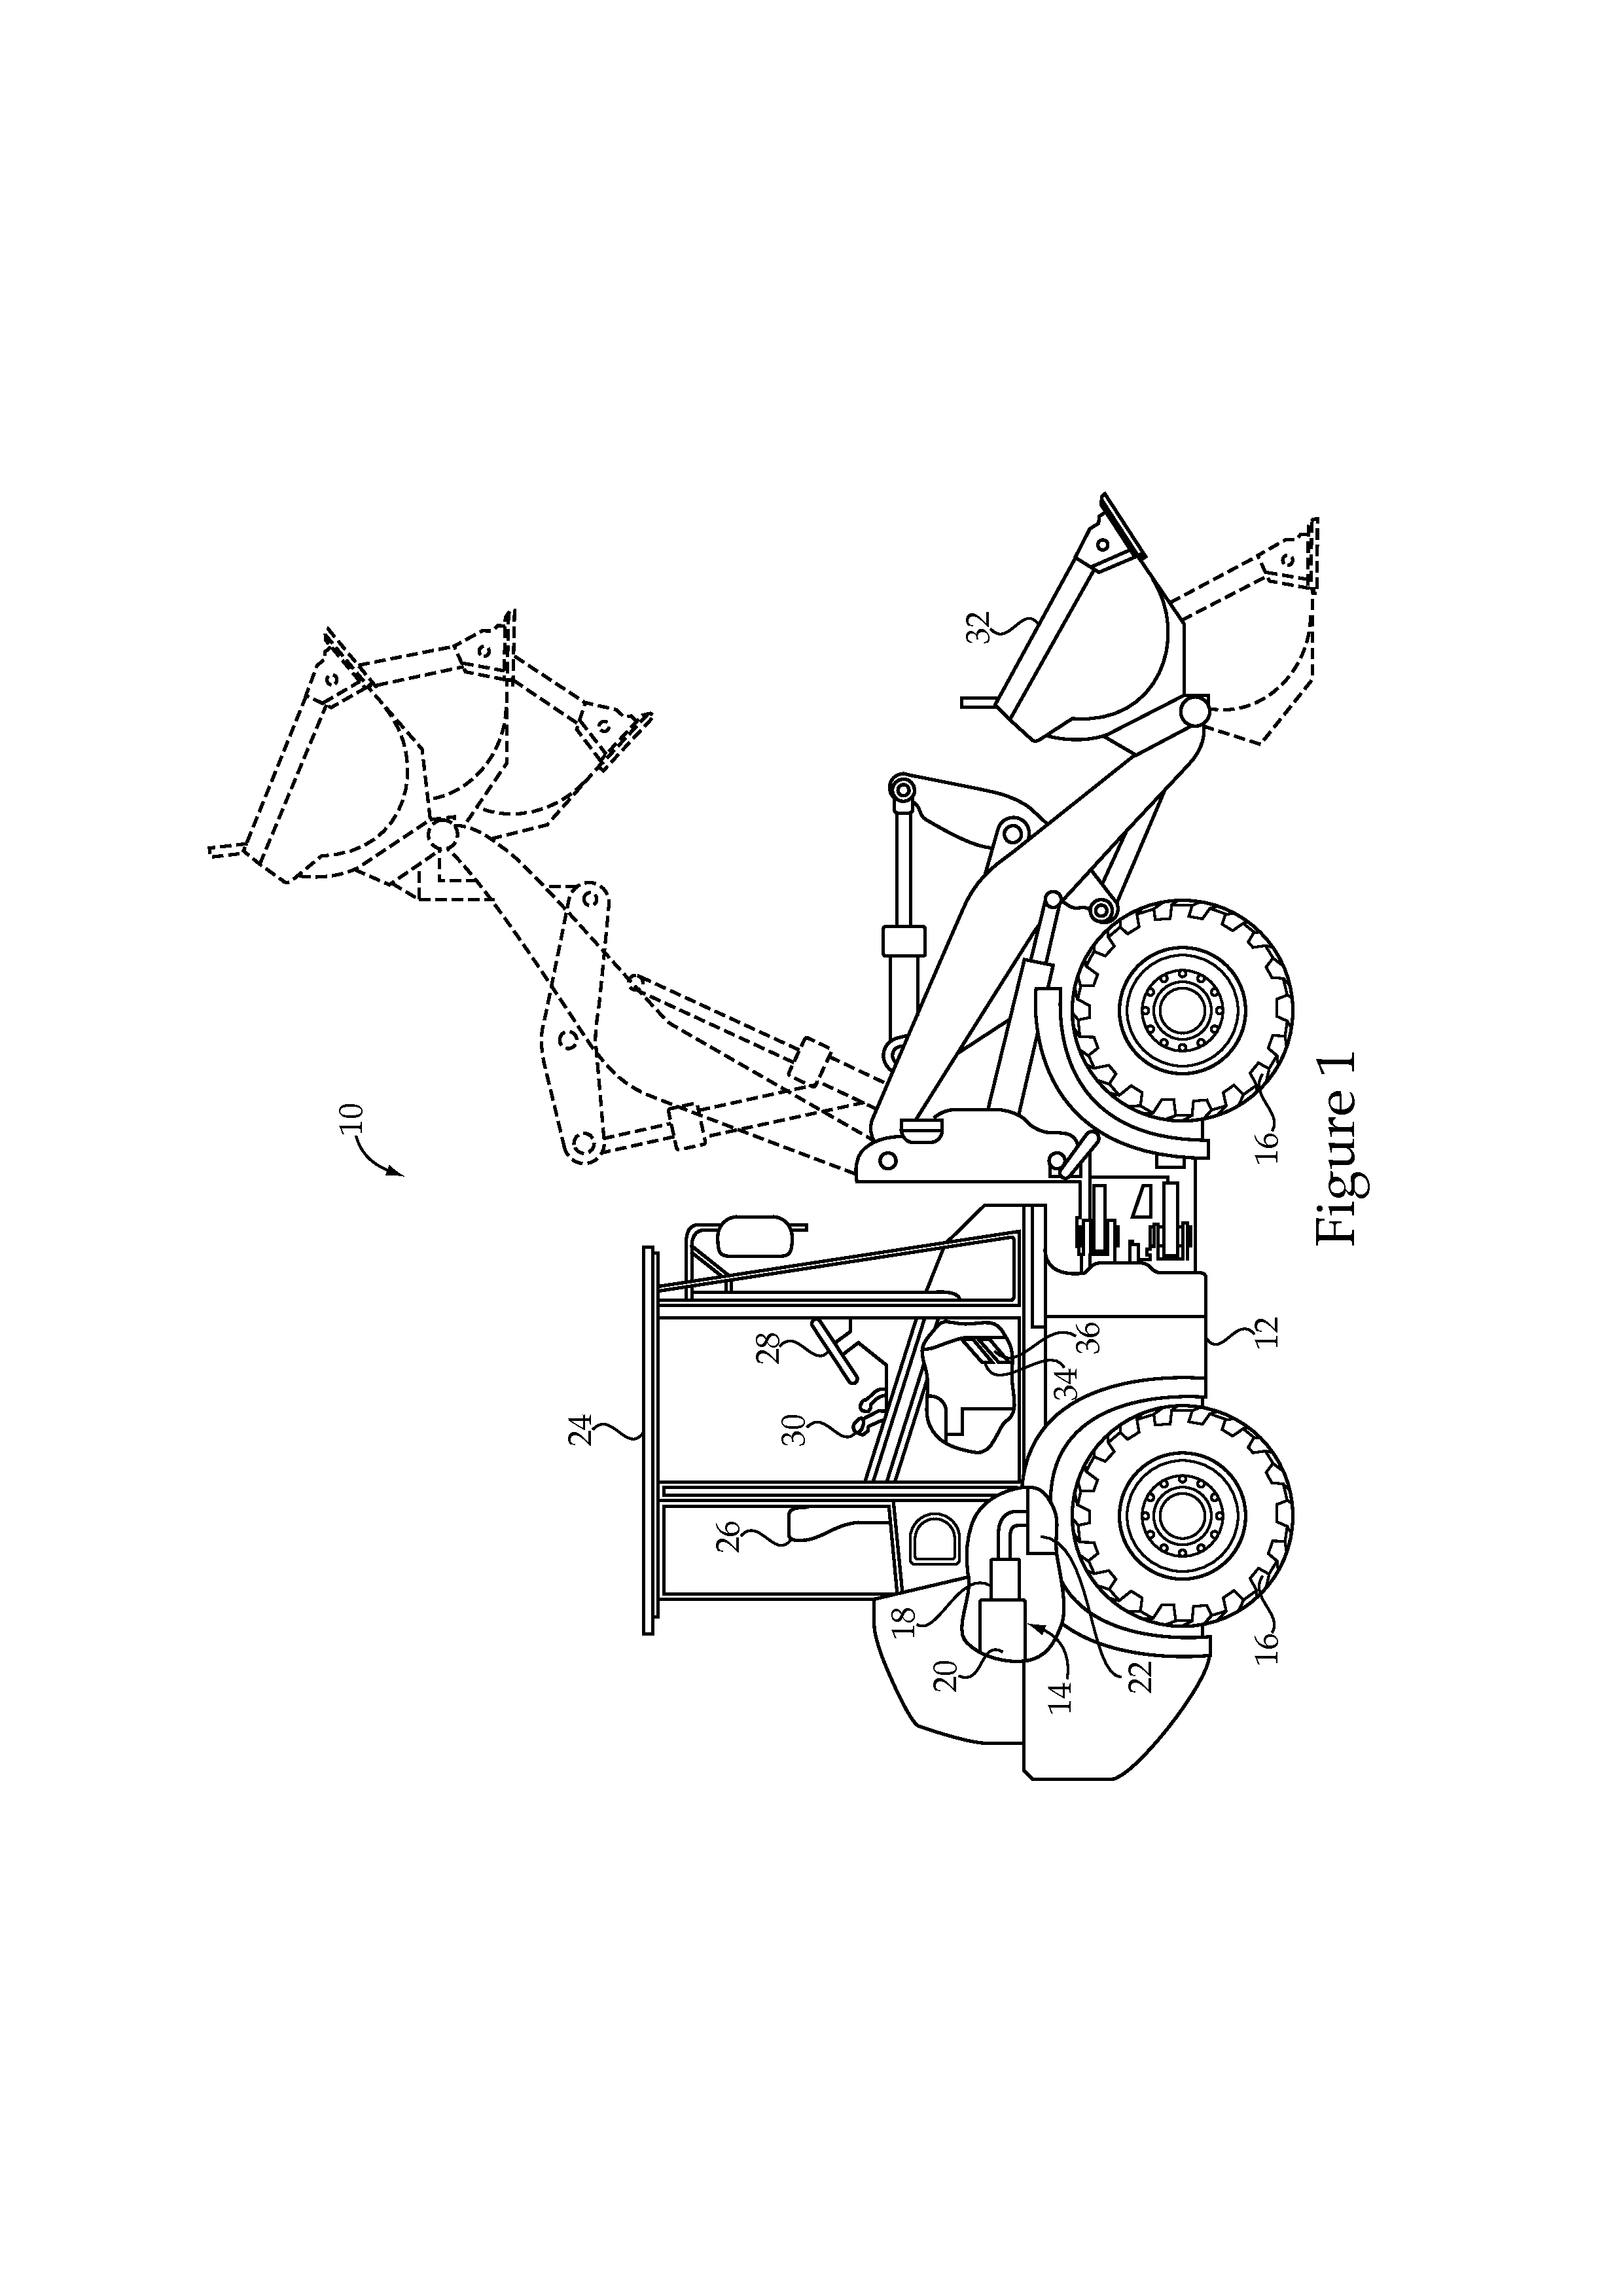 Method Of Controlling Gear Ratio Rate Of Change In Continuously Variable Transmission